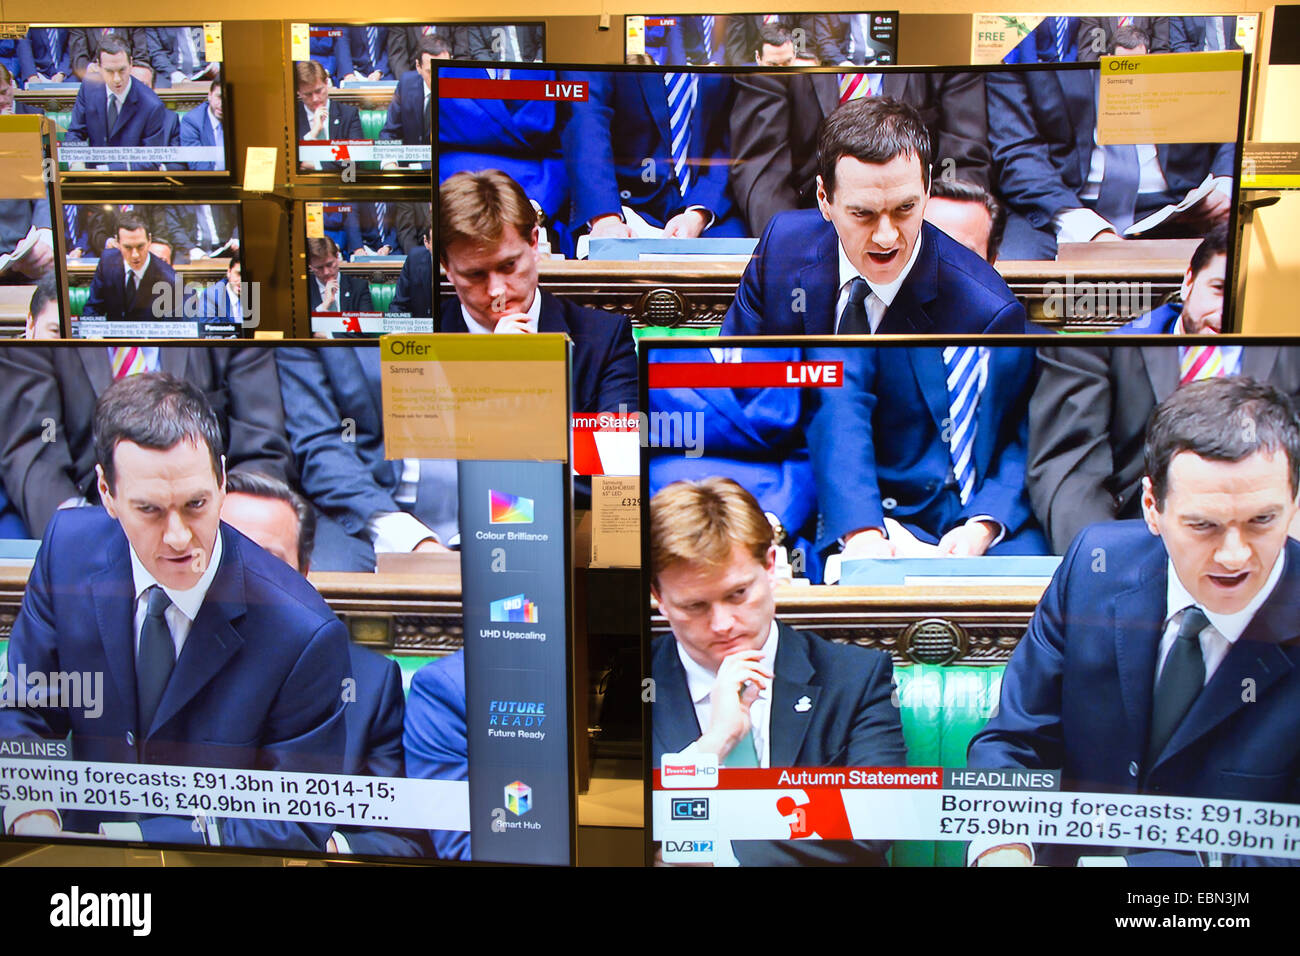 London, UK. 3rd December, 2014. Picture shows George Osborne, Chancellor of the Exchequer deleivering his Autumn Statement to the House of Commons shown on multiple televisions in a central London department store. Credit:  Clickpics/Alamy Live News Stock Photo